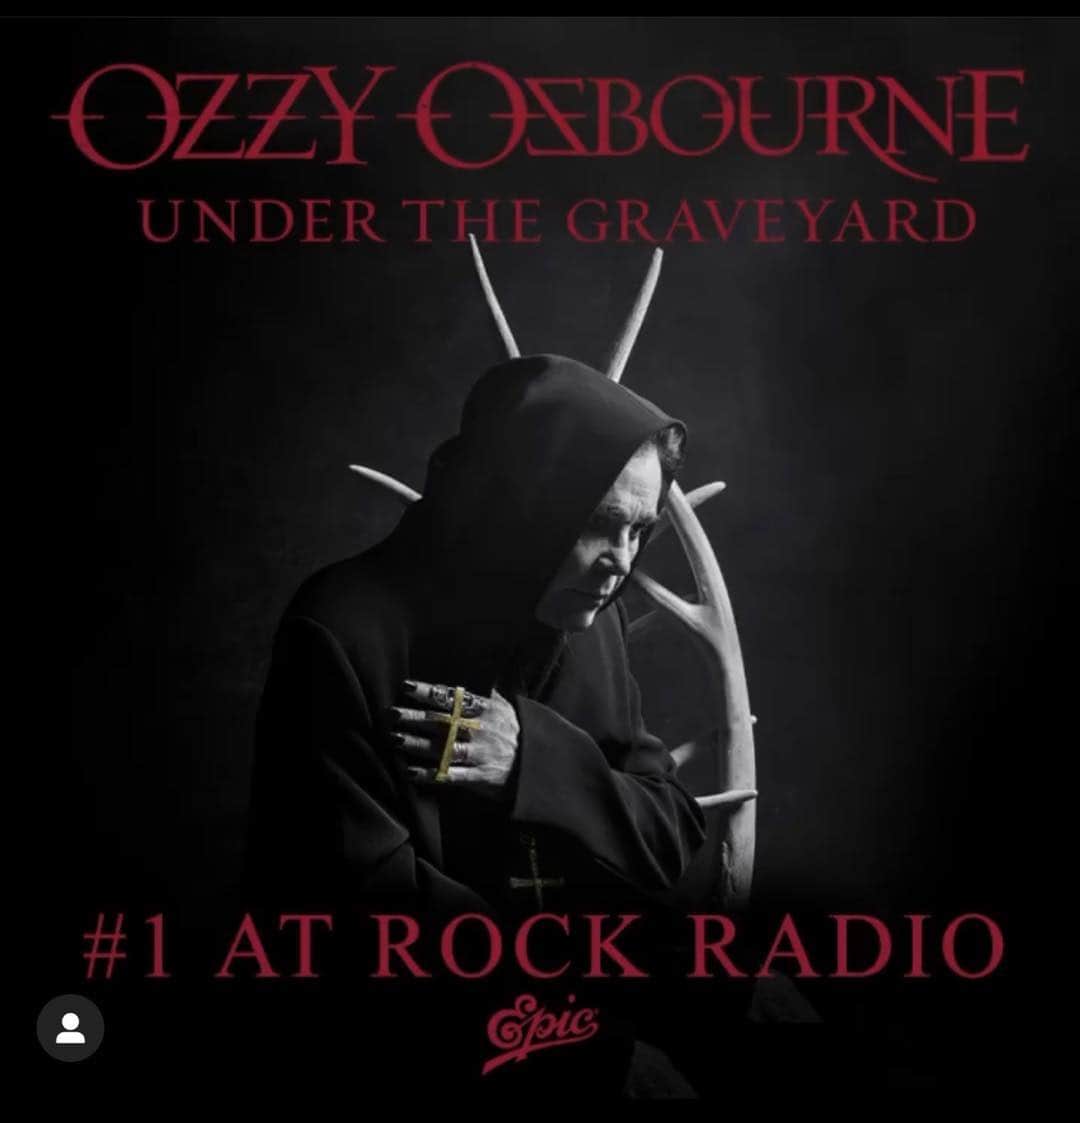 Chad Smithのインスタグラム：「Me and @thisiswatt had cheeseburgers one nite then went back to the studio and wrote and recorded the music in an hour. Did 2 takes and there it is. Sometimes the best ones come outta nowhere and fast. I’m so happy for @ozzyosbourne to have his first #1 Rick song. Well deserved.」